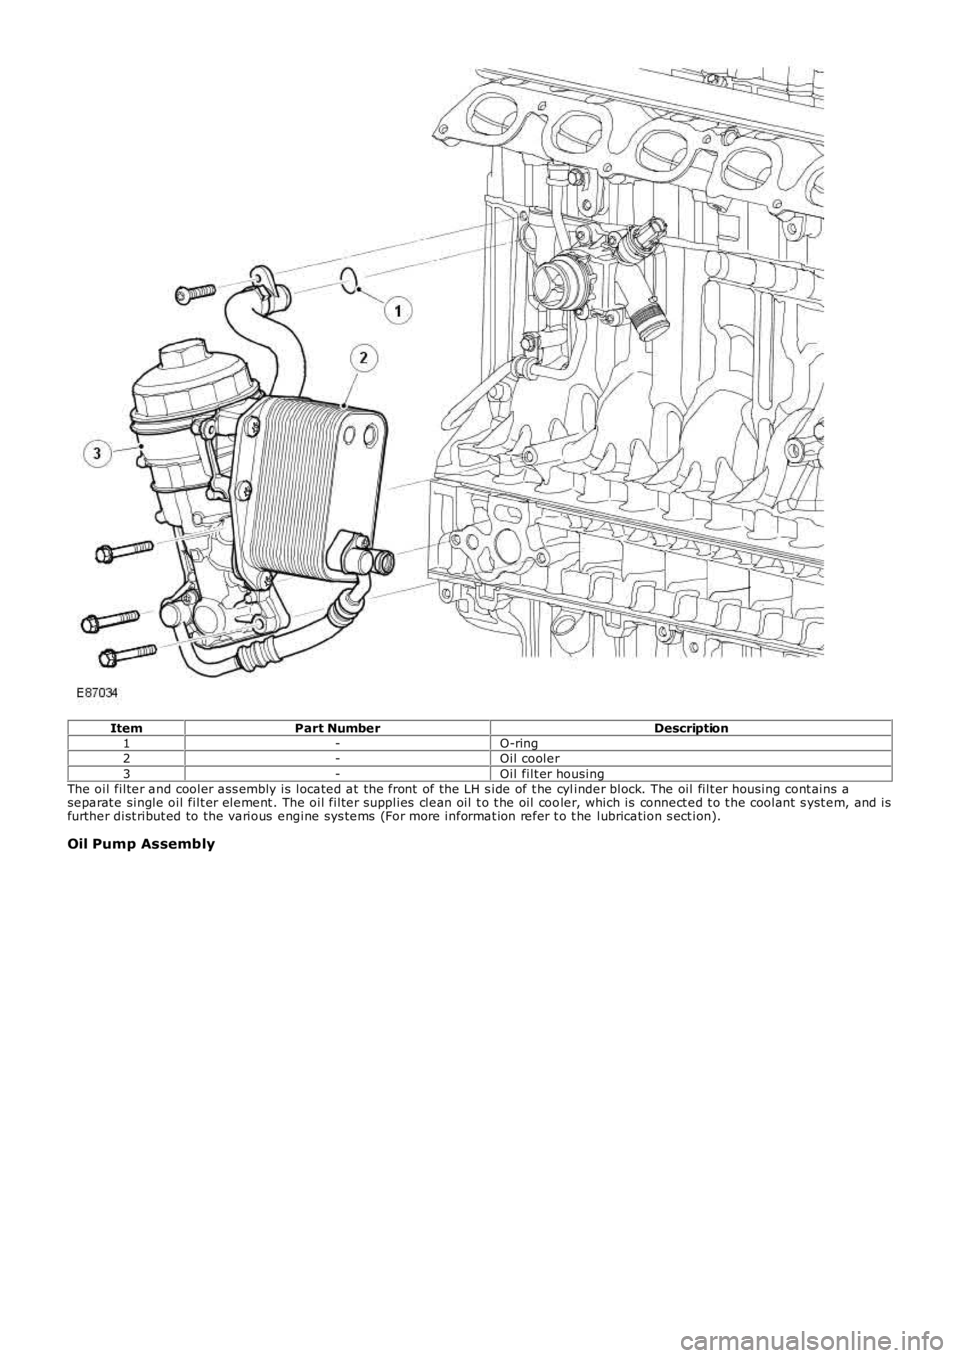 LAND ROVER FRELANDER 2 2006  Repair Manual ItemPart NumberDescription1-O-ring2-Oil cooler3-Oil filt er housingThe oil filter and cooler ass embly is located at  the front  of the LH s ide of t he cylinder block. The oil filt er housing cont ai